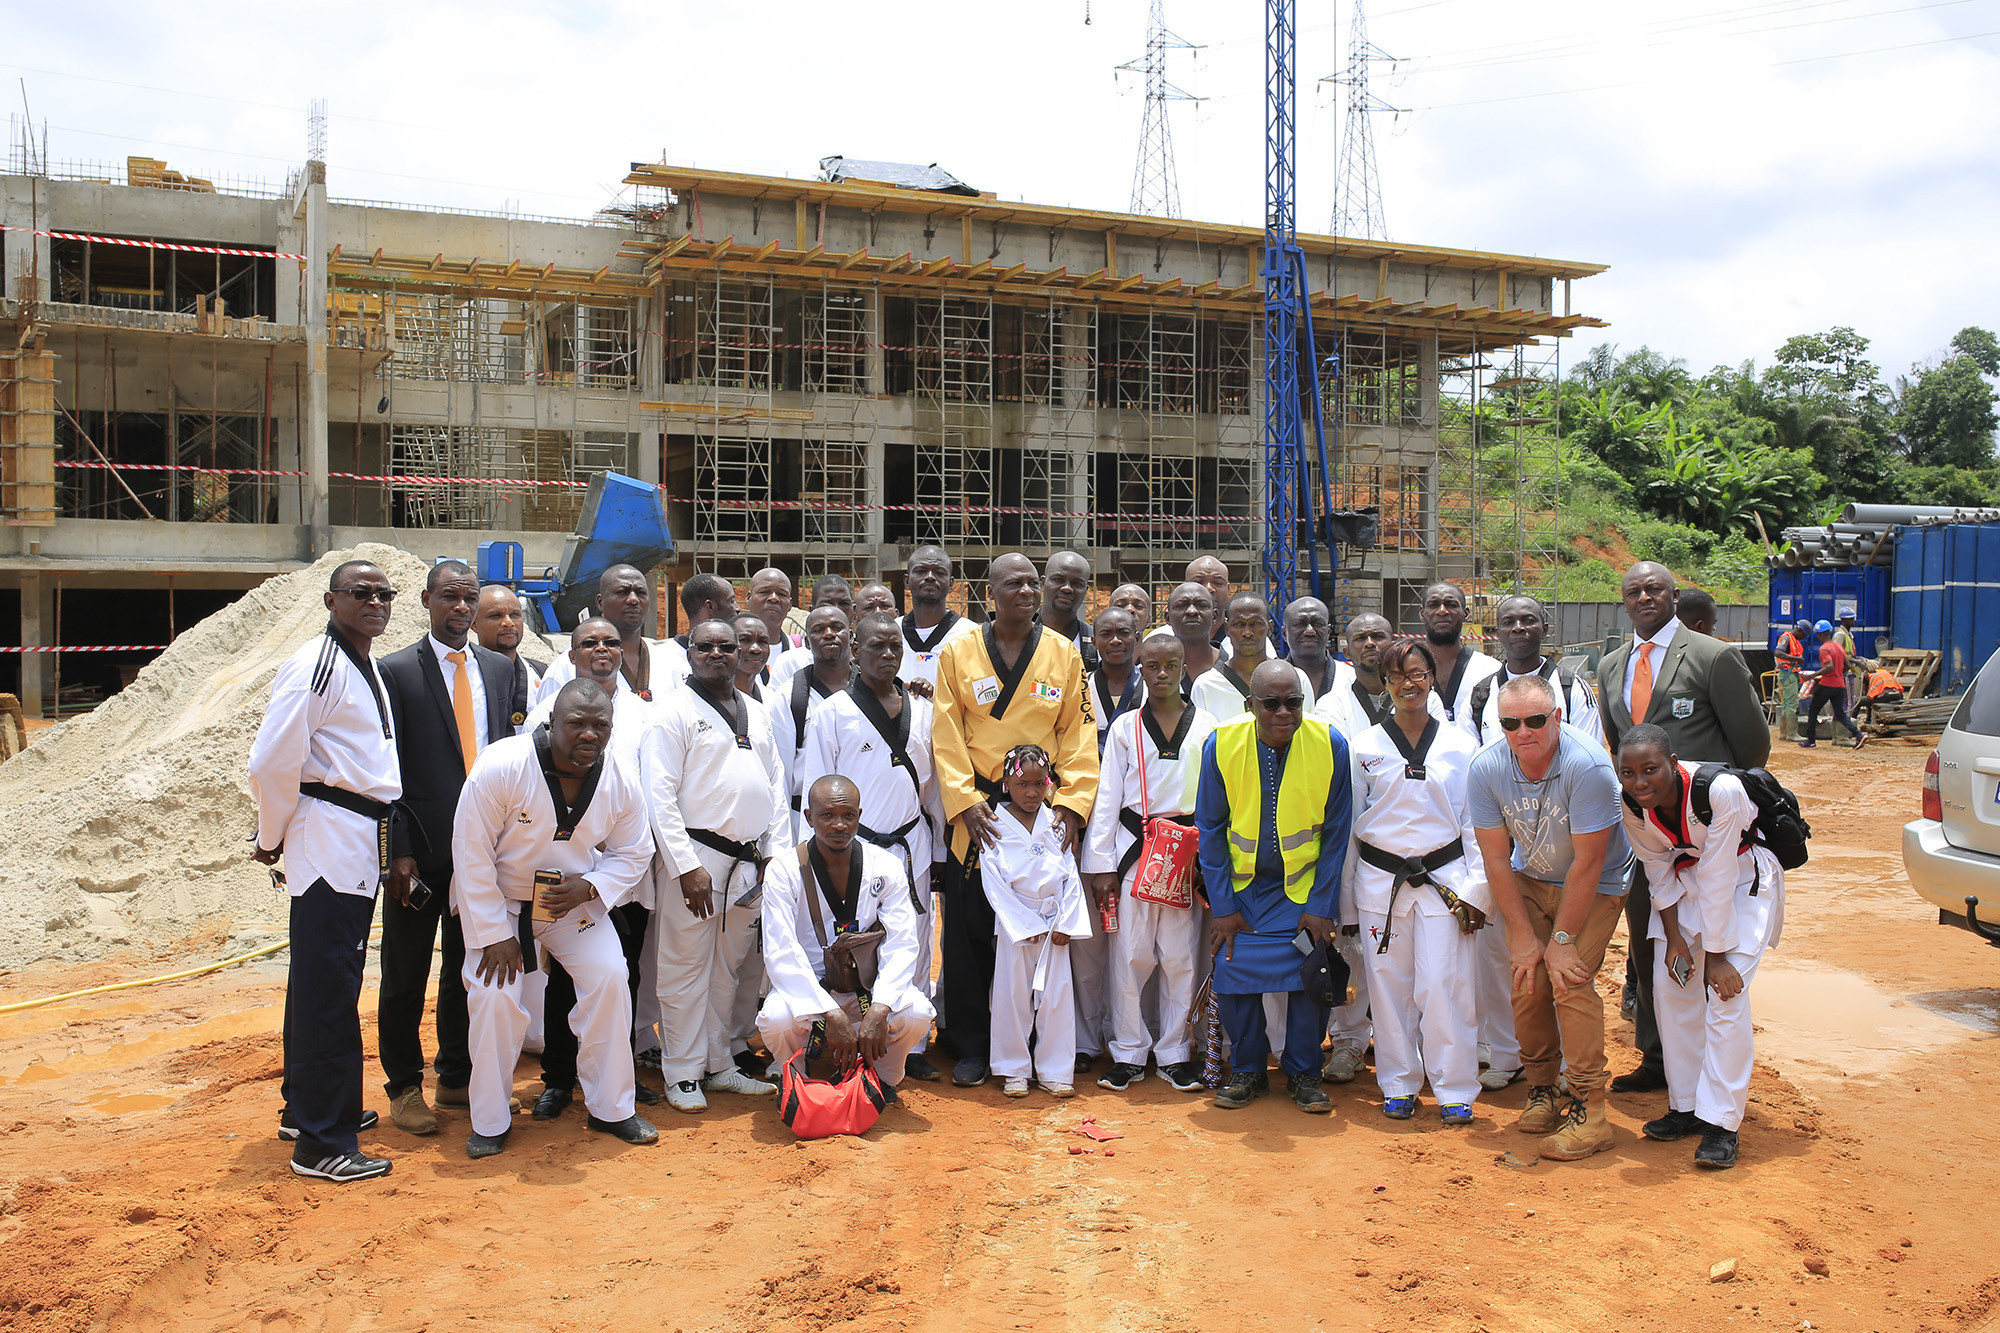 Members of the Ivory Coast taekwondo community visited a new facility being created for the sport ©FITKD